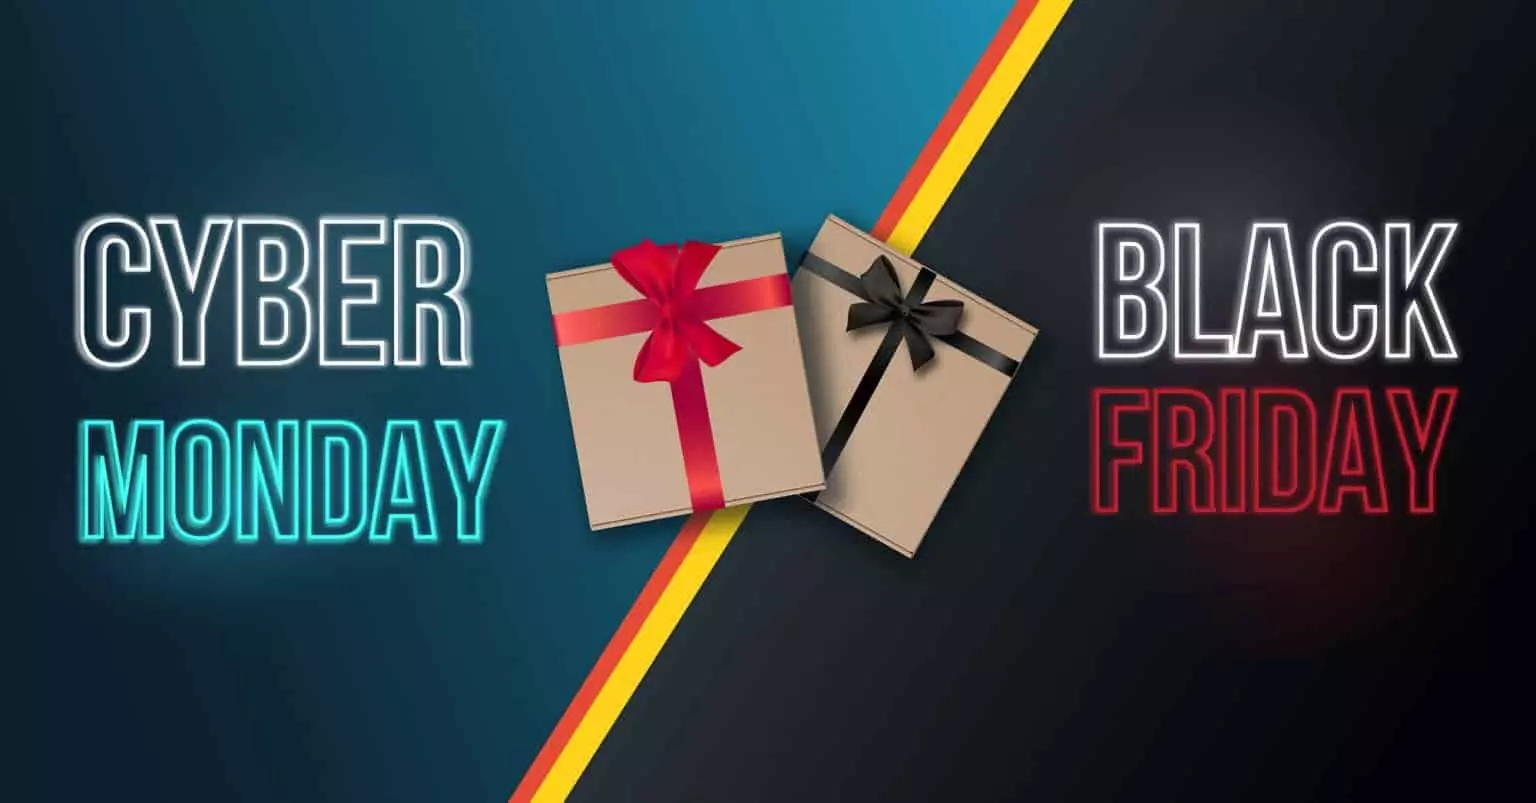 How To Offer The Best Deals For Black Friday & Cyber Monday